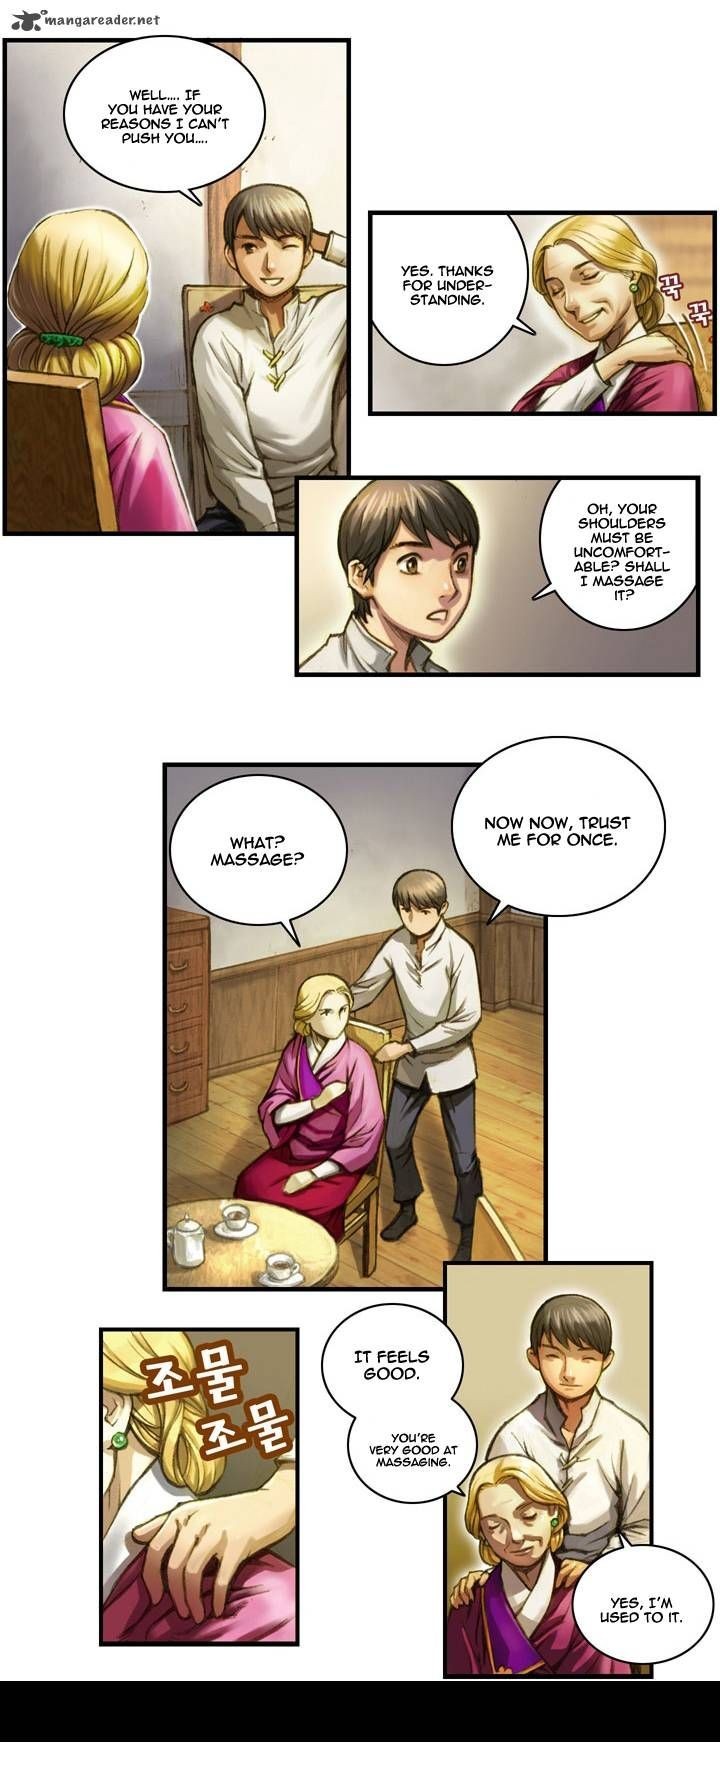 The Legendary Moonlight Sculptor chapter 6 page 2